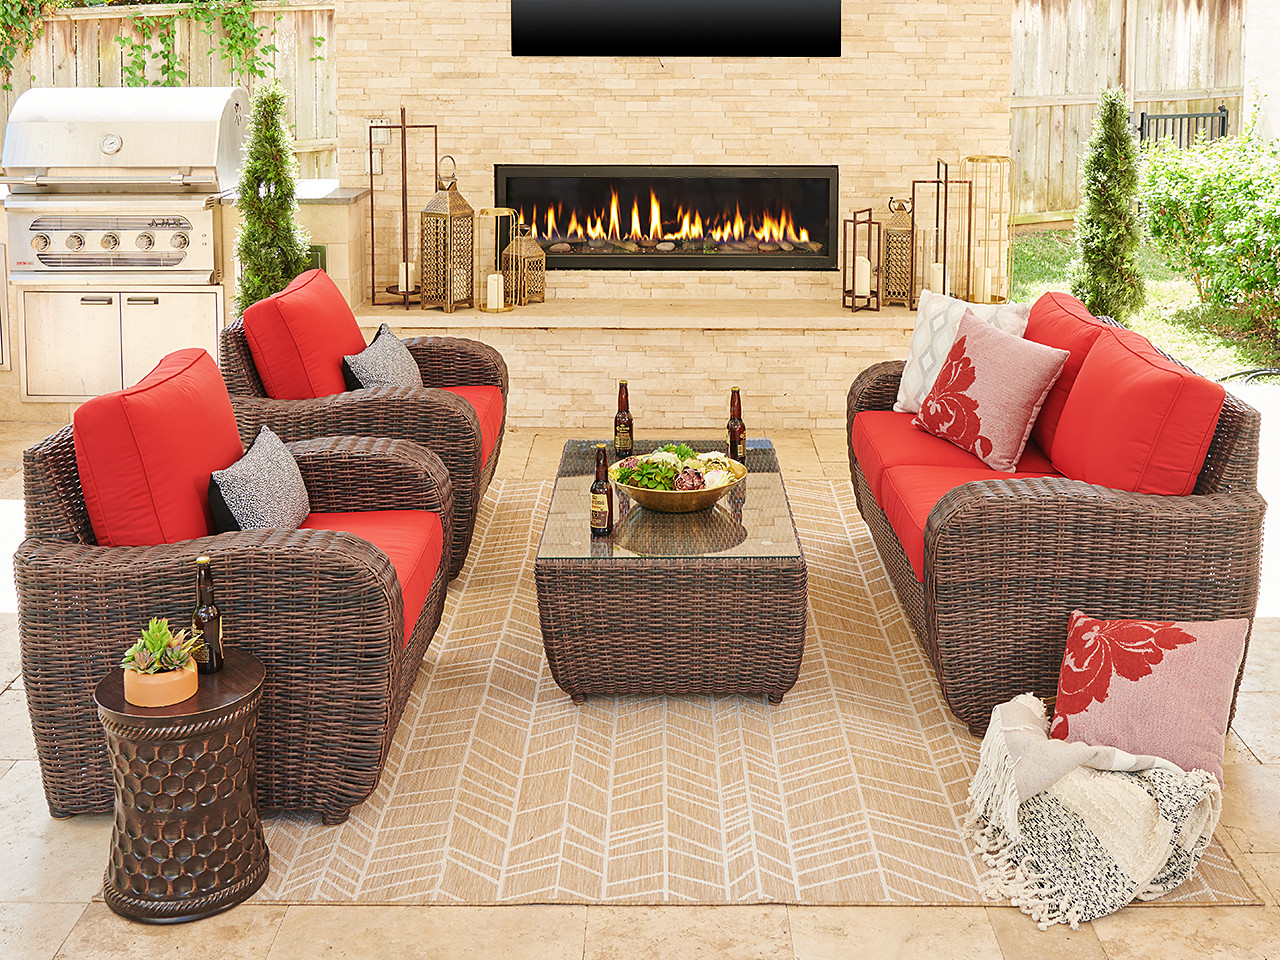 Valencia Sangria Outdoor Wicker and Jockey Red Cushion 4 Pc. Loveseat Group with 48 x 28 in. Glass Top Coffee Table